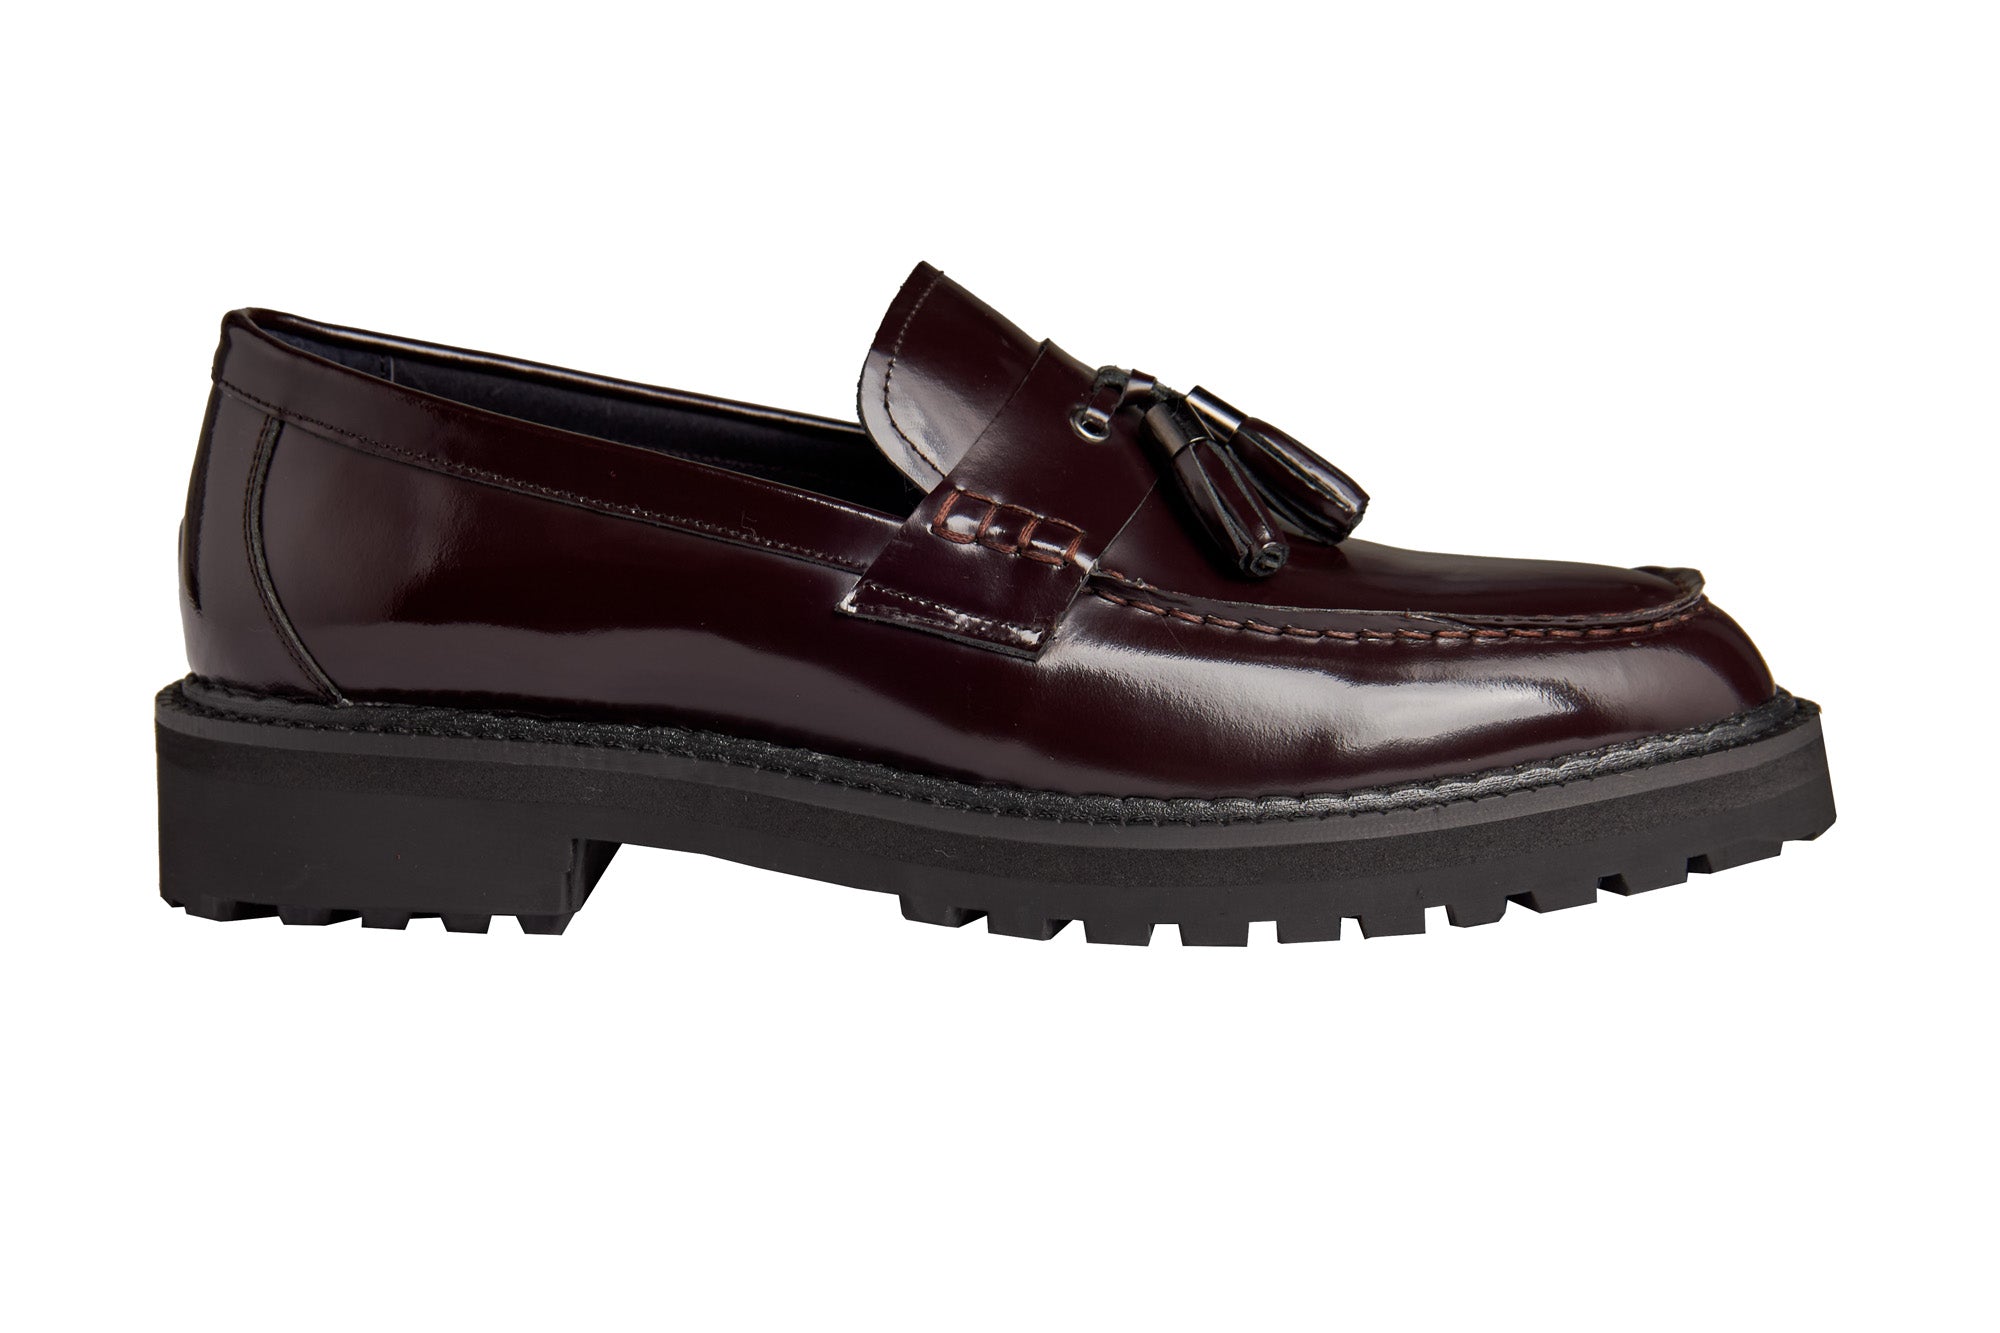 BROWN PATENT LEATHER TASSEL LOAFERS